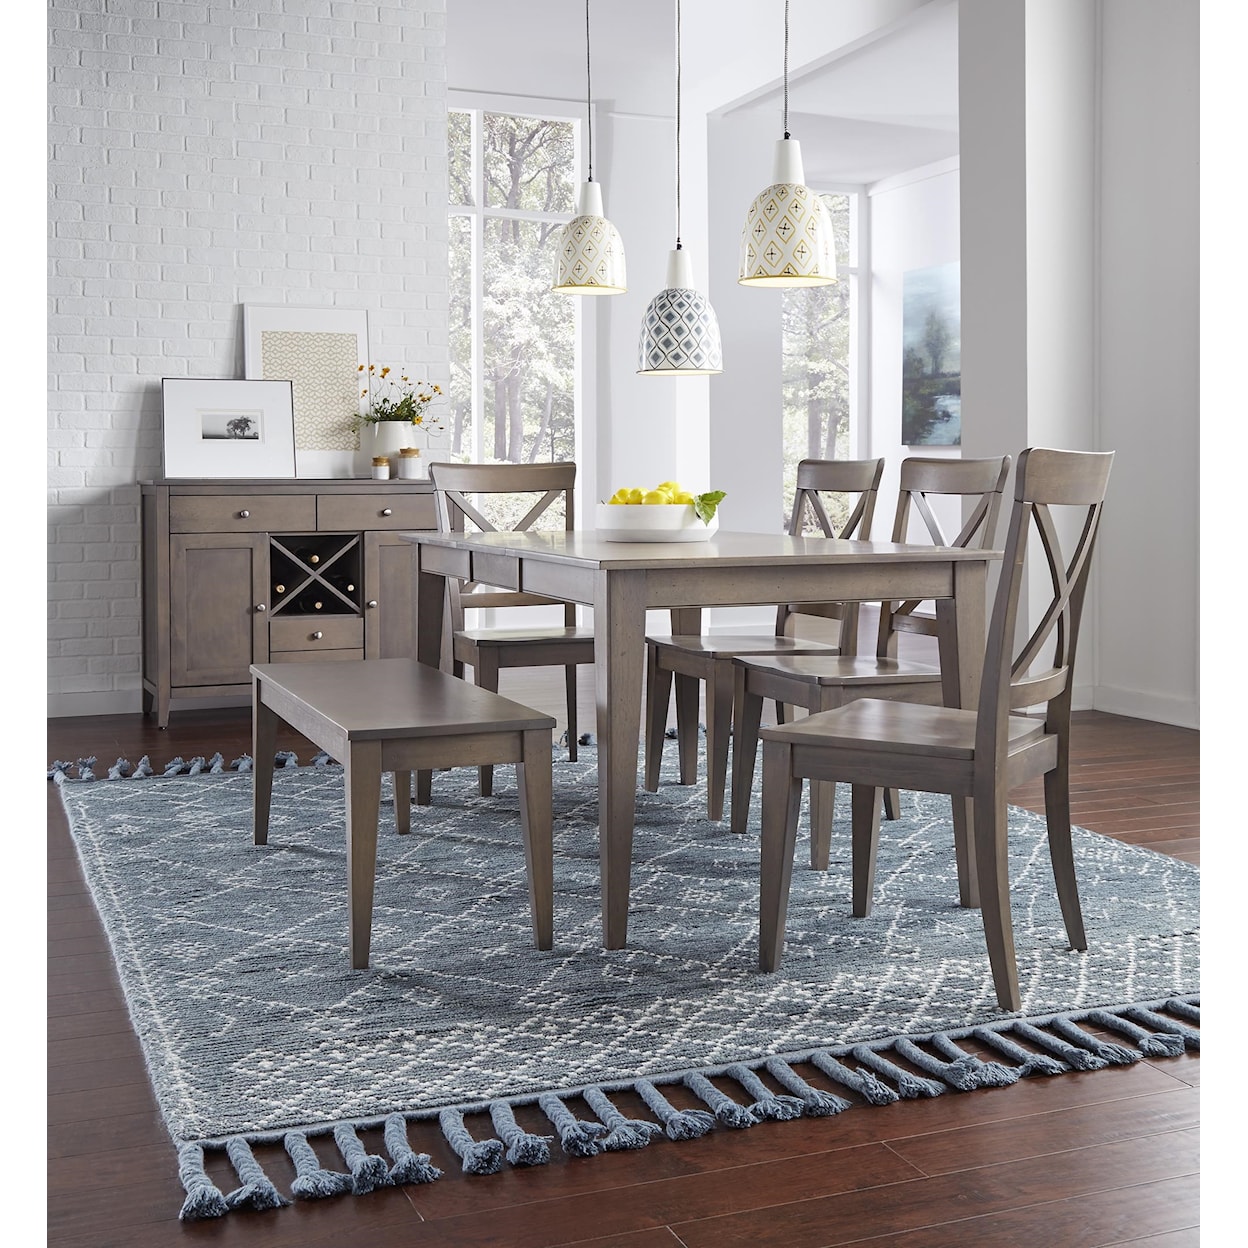 Canadel Gourmet Dining Table